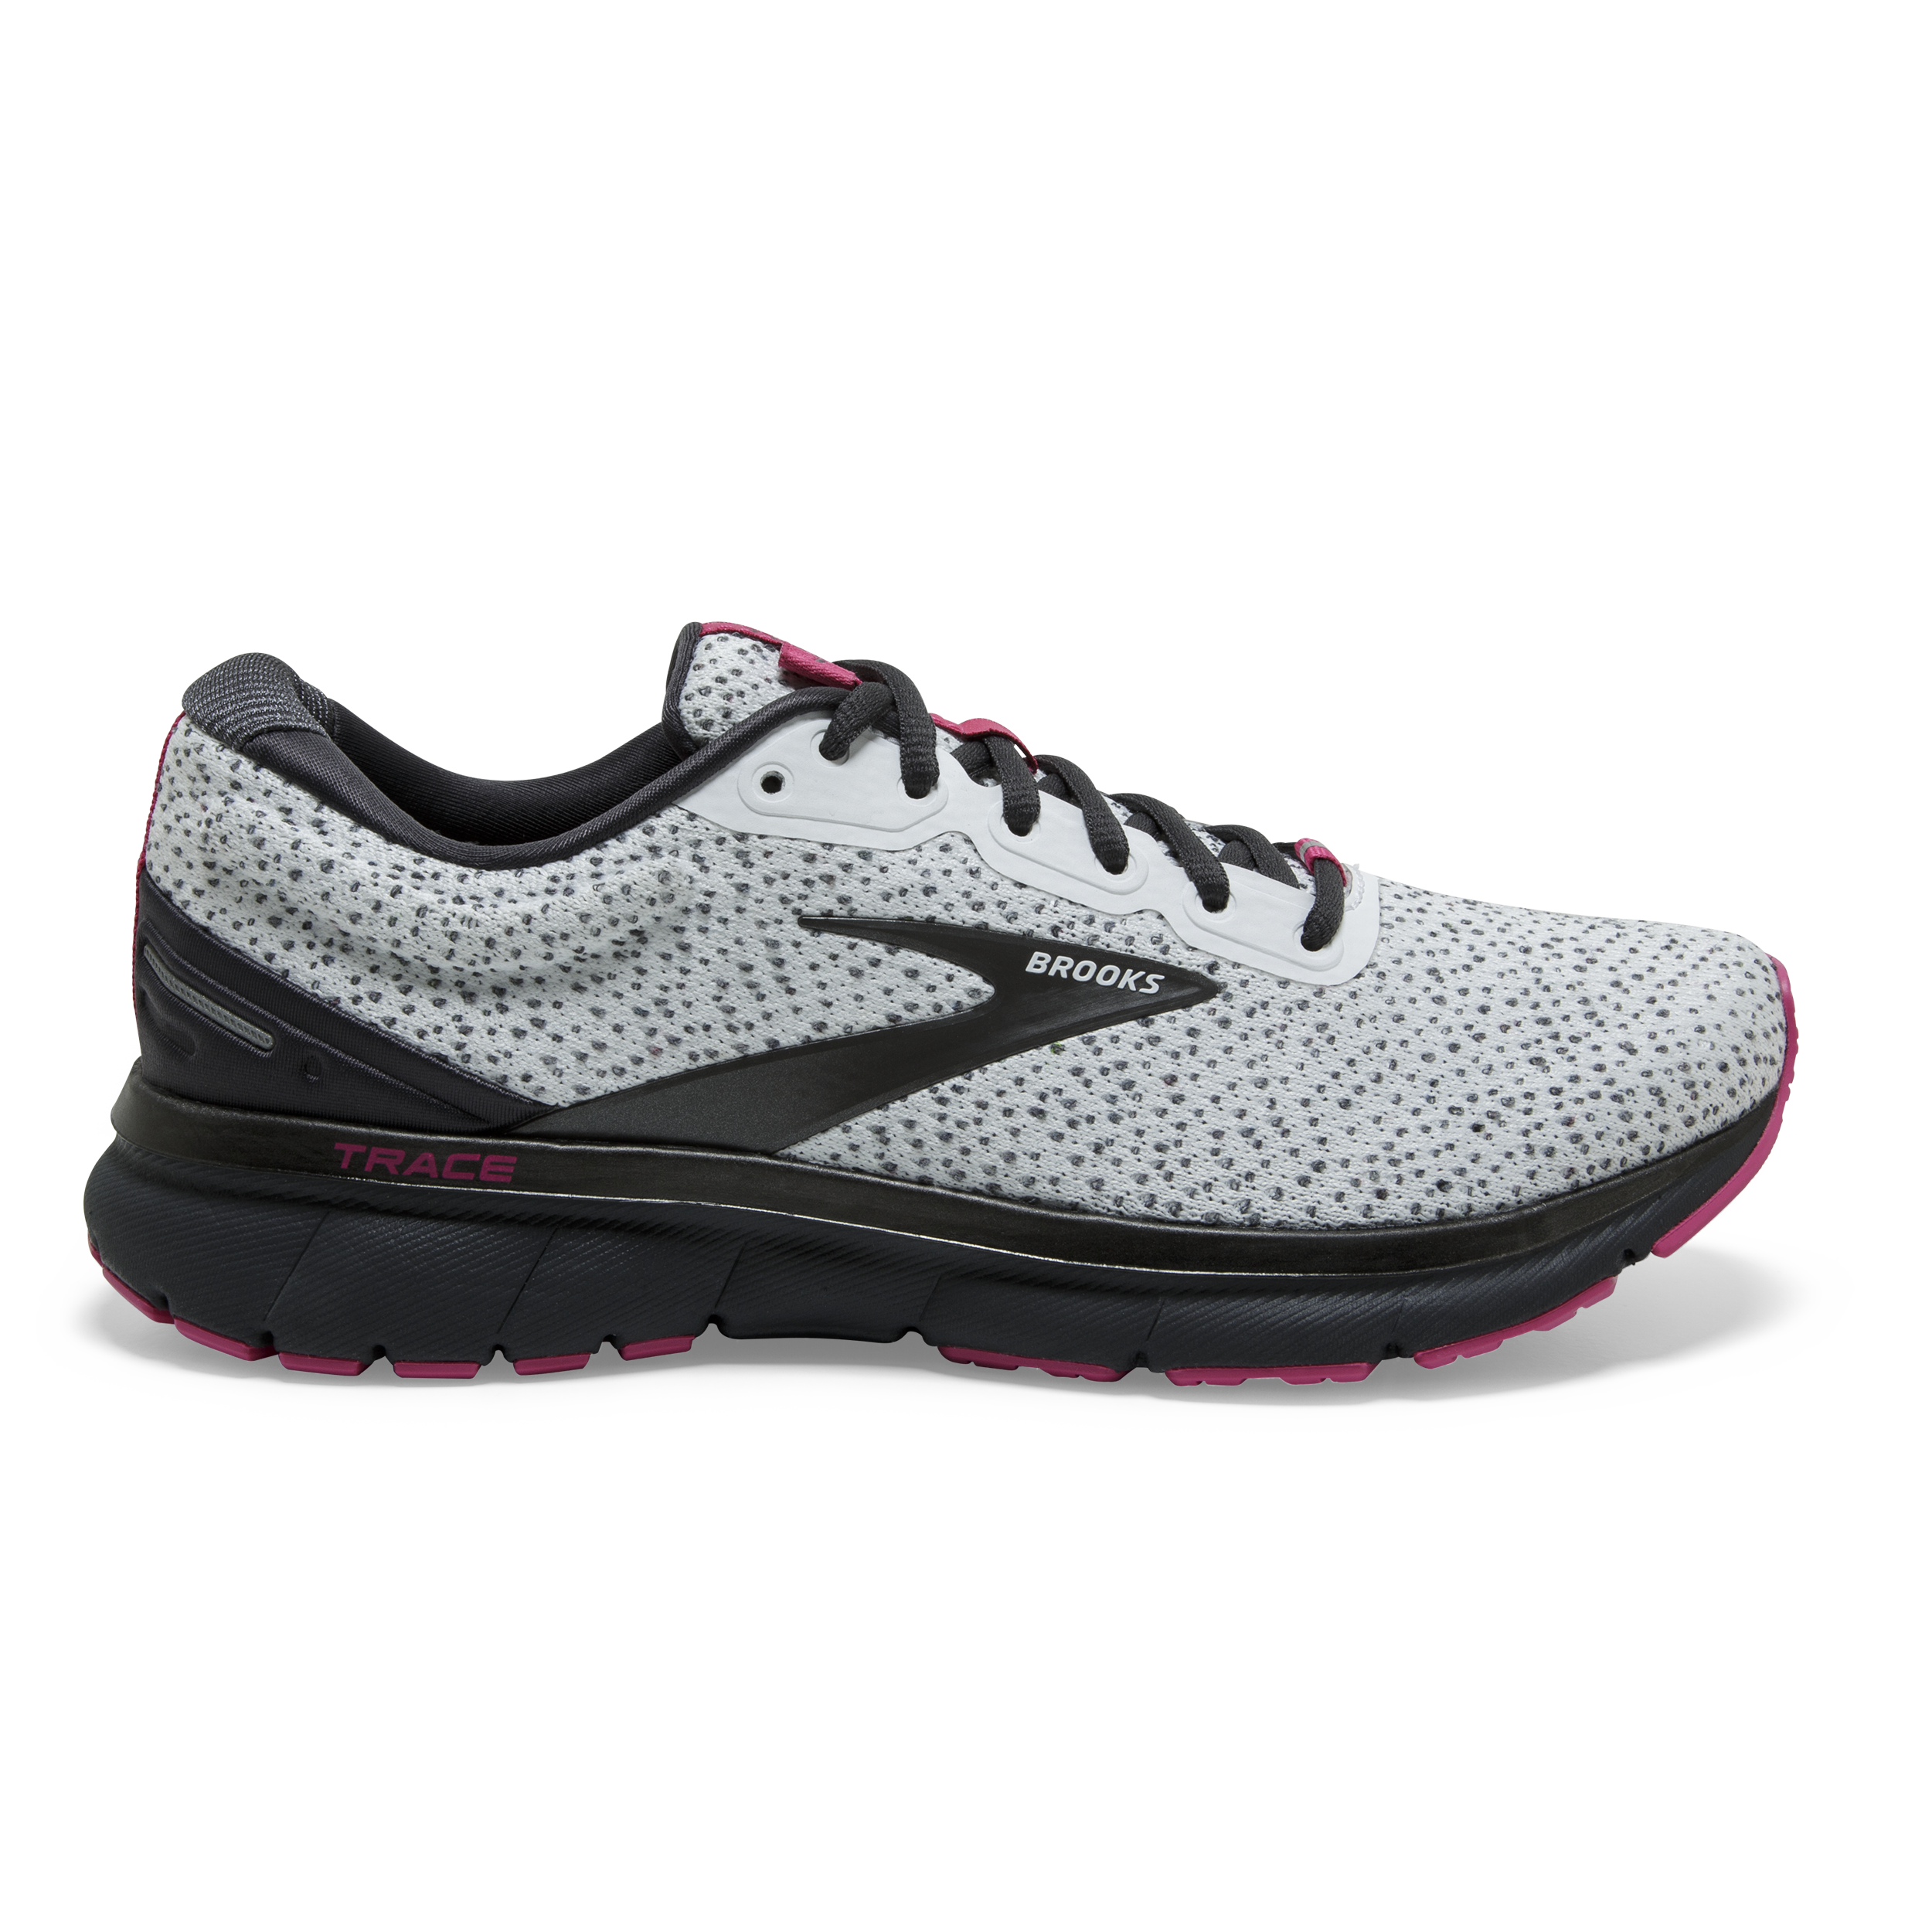 best brooks running shoes for treadmill